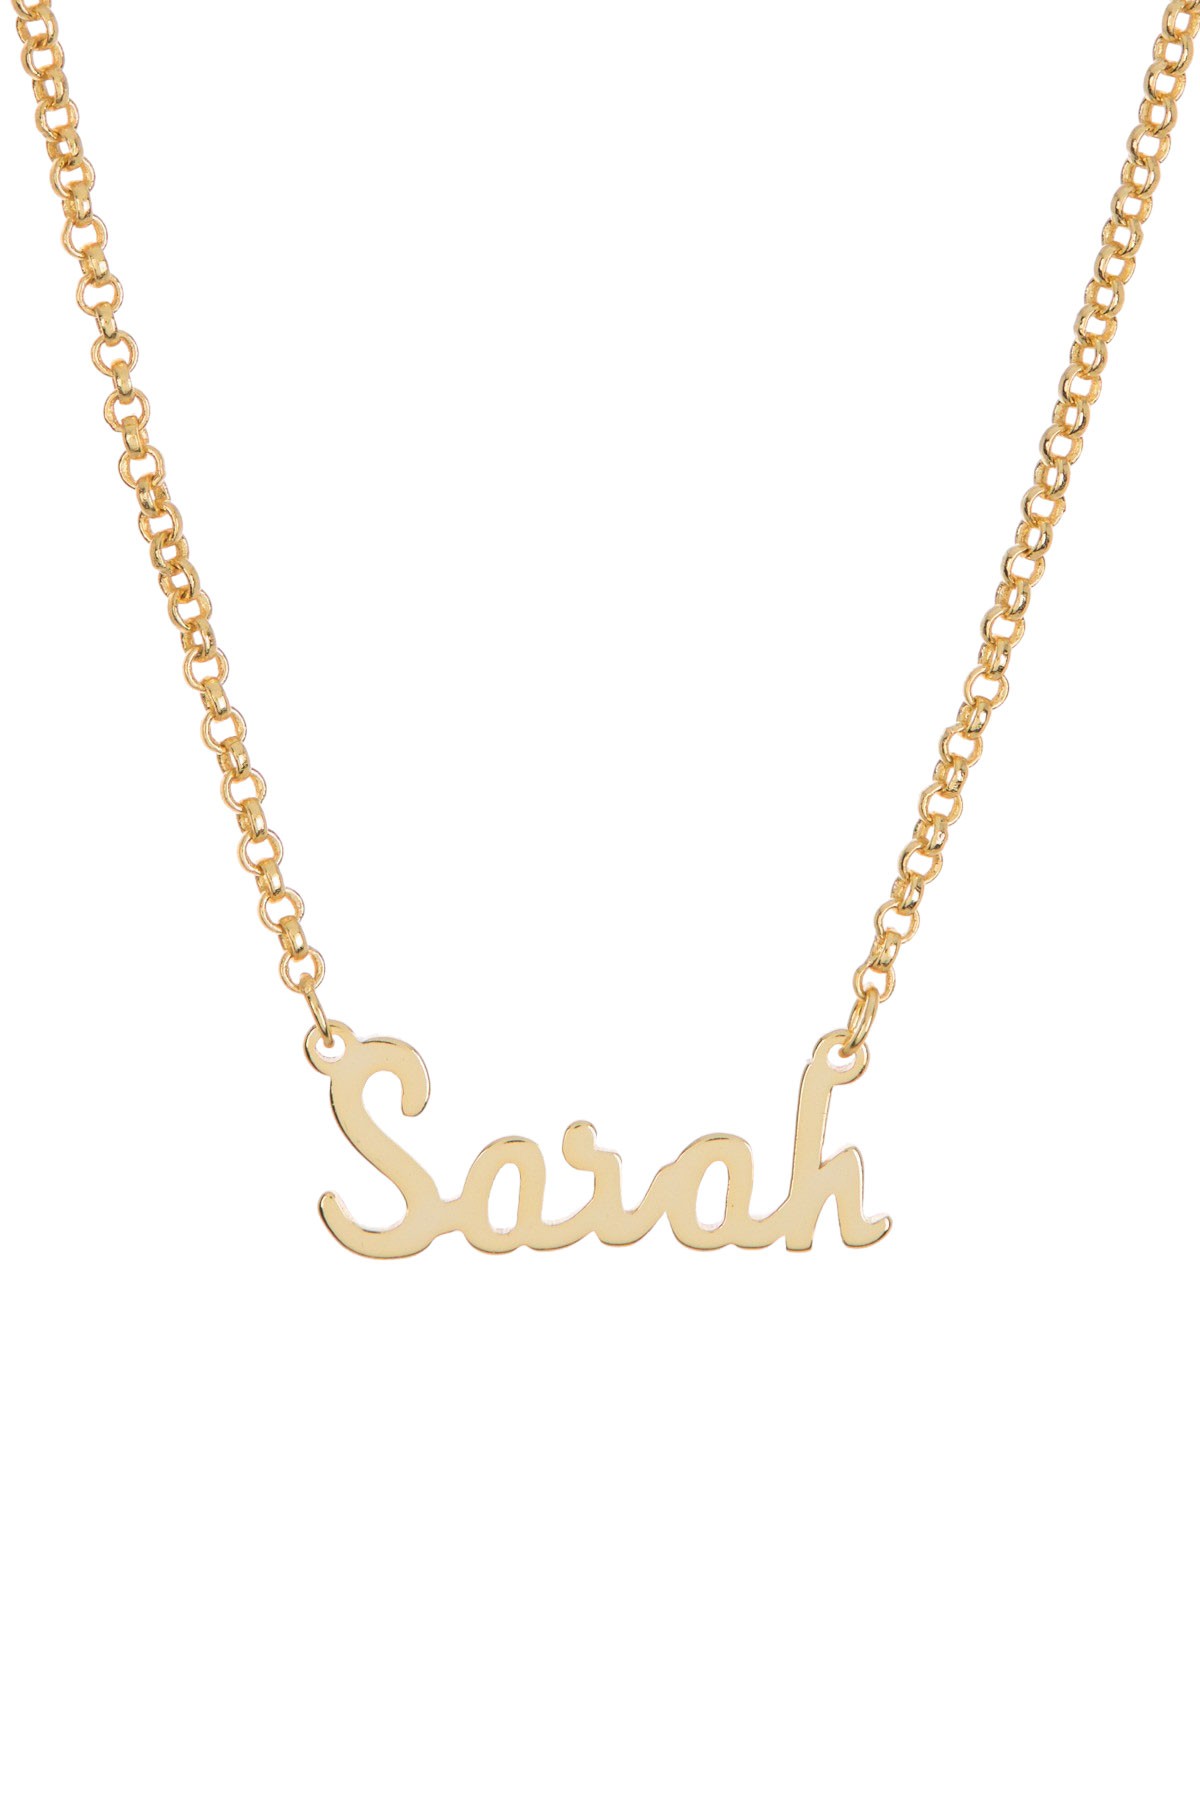 18K Yellow Gold Plated Sterling Silver 'Sarah' Name Pendant Necklace Argento Vivo